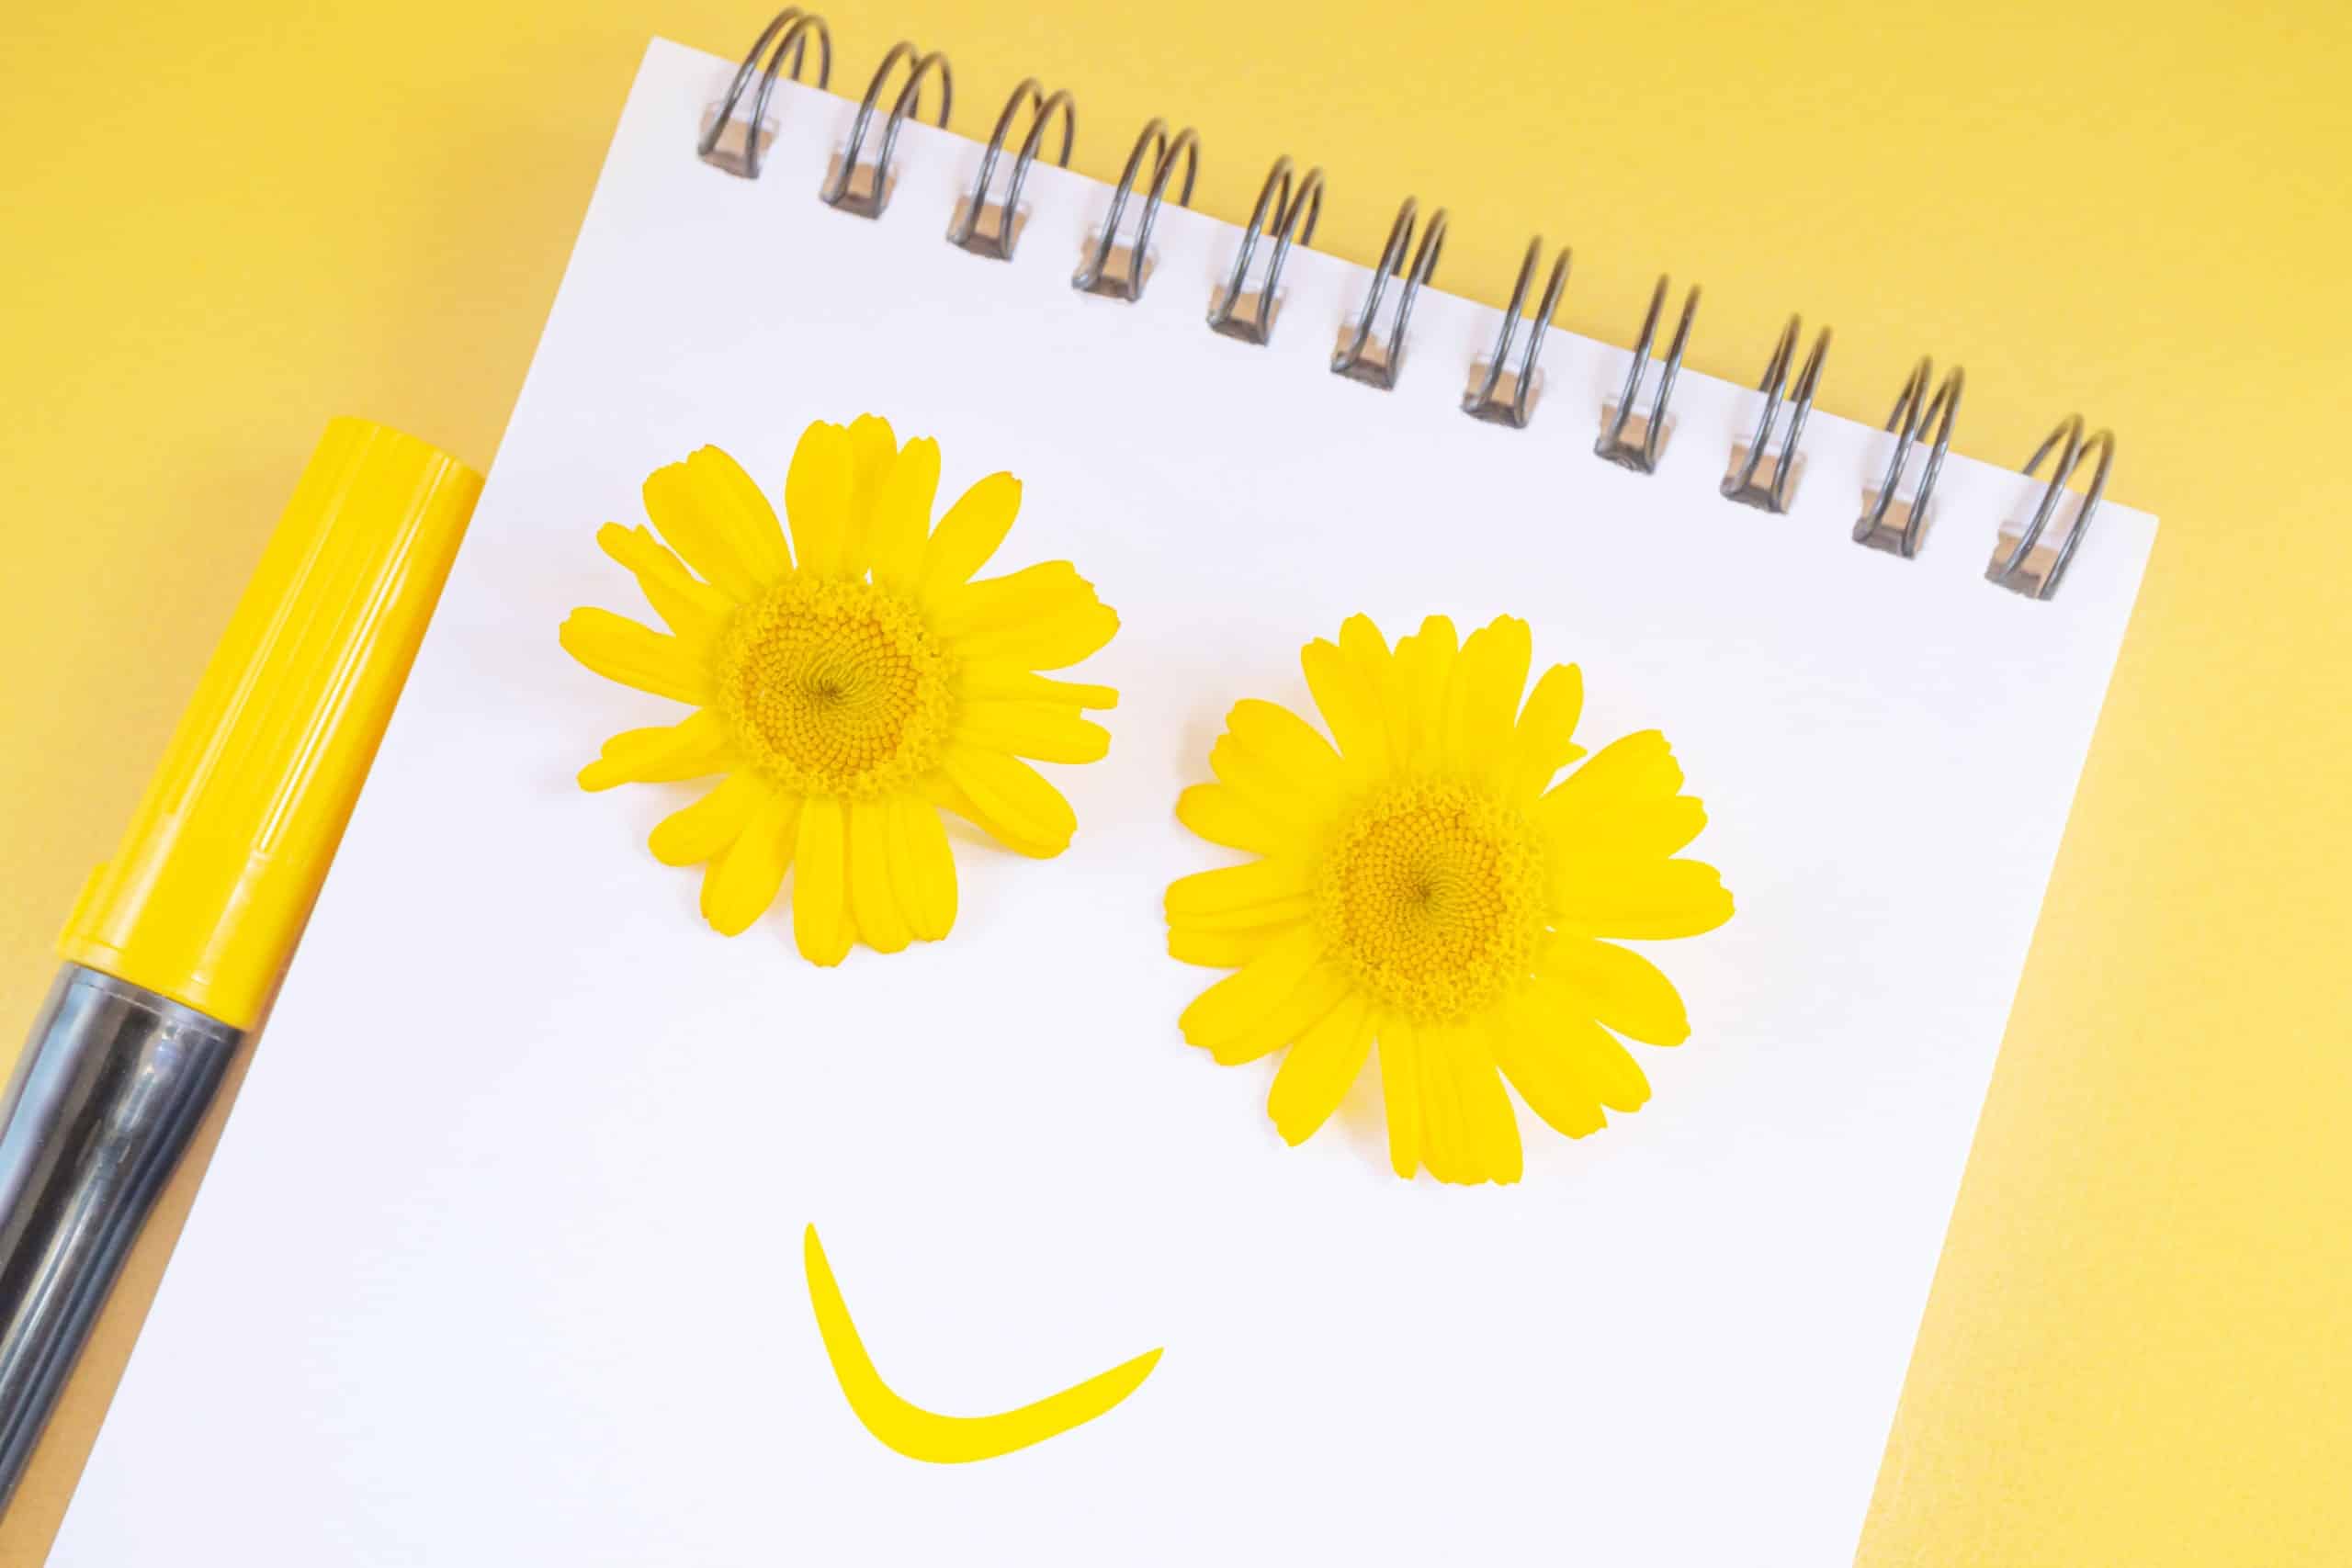 Spiral notepad with a smile drawn on the page, yellow daisies as eyes.